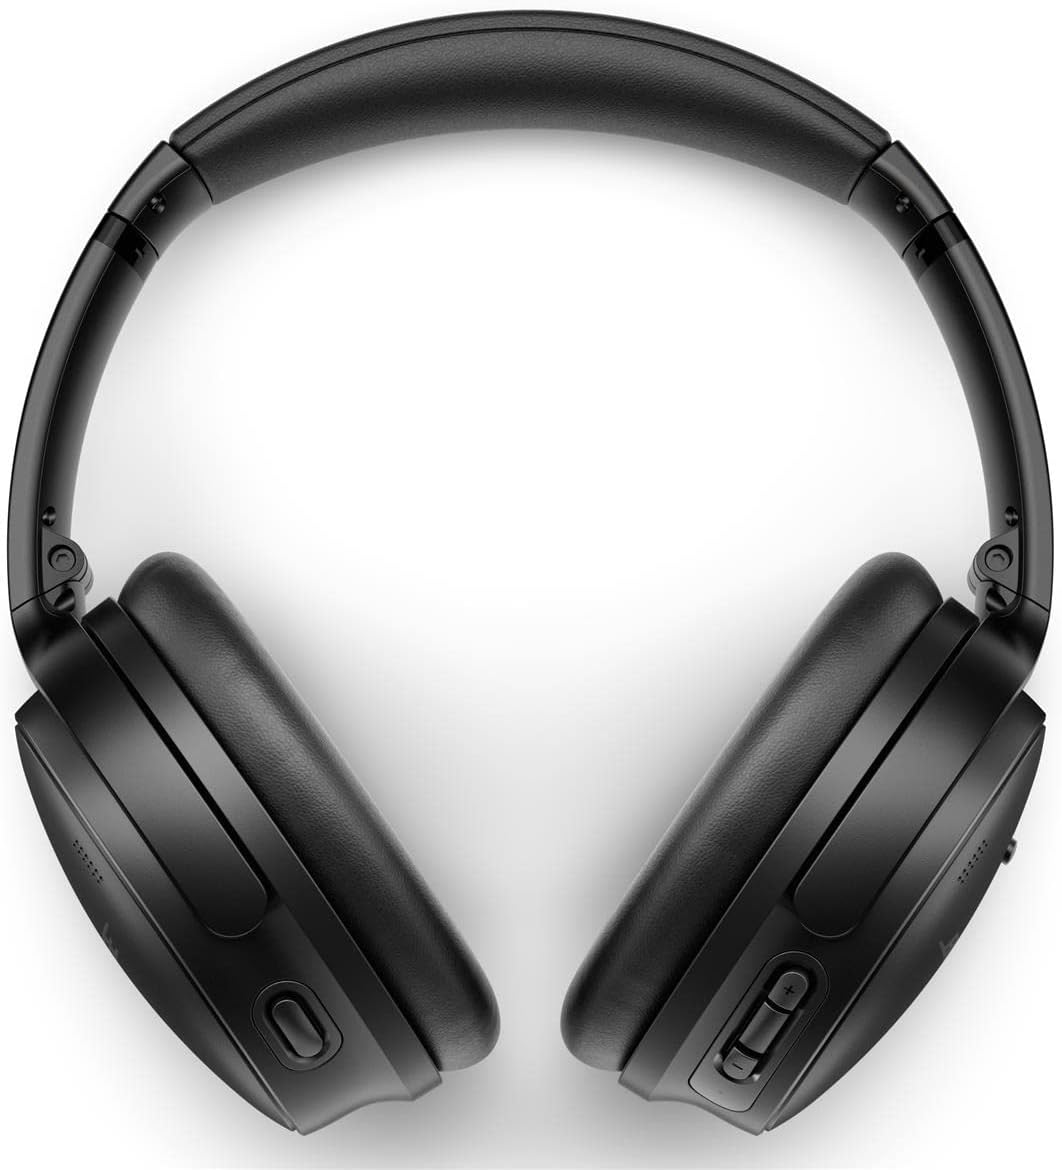 Bose QuietComfort 45 wireless noise cancelling headphones - Black: Choose between Quiet Mode for full noise cancelling or Aware Mode to hear your environment and music simultaneously. 0017817835015